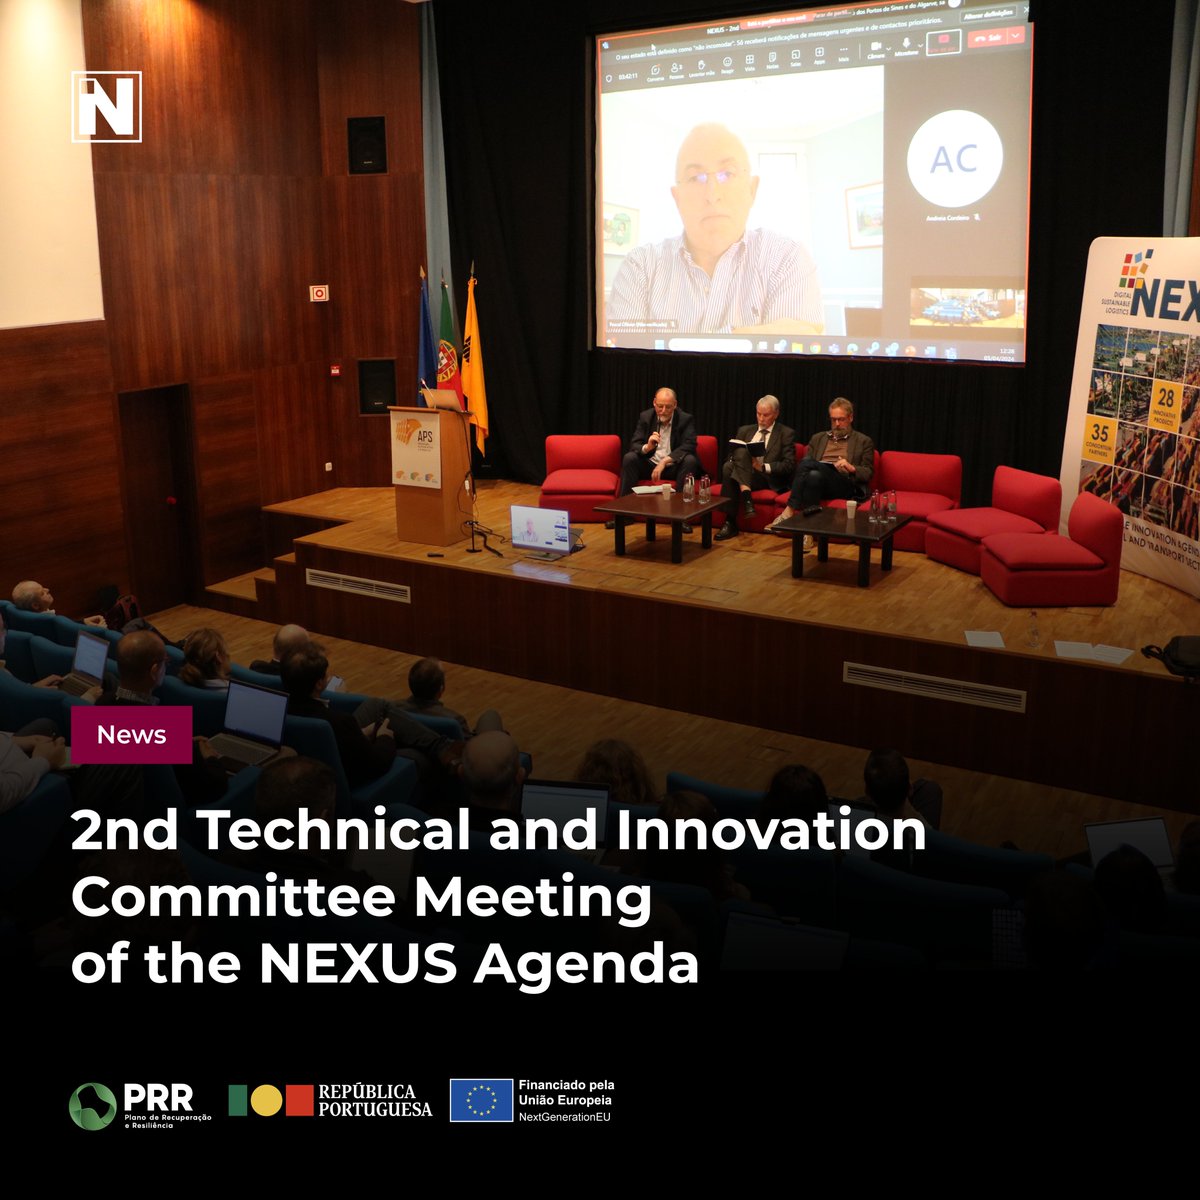 2nd Technical and Innovation Committee Meeting of the NEXUS Agenda brings product developers and international experts together in a two-day meeting.
#NexusAgenda
#PRR
#RecuperarPortugal
#portofsines
#ConstruirOFuturo